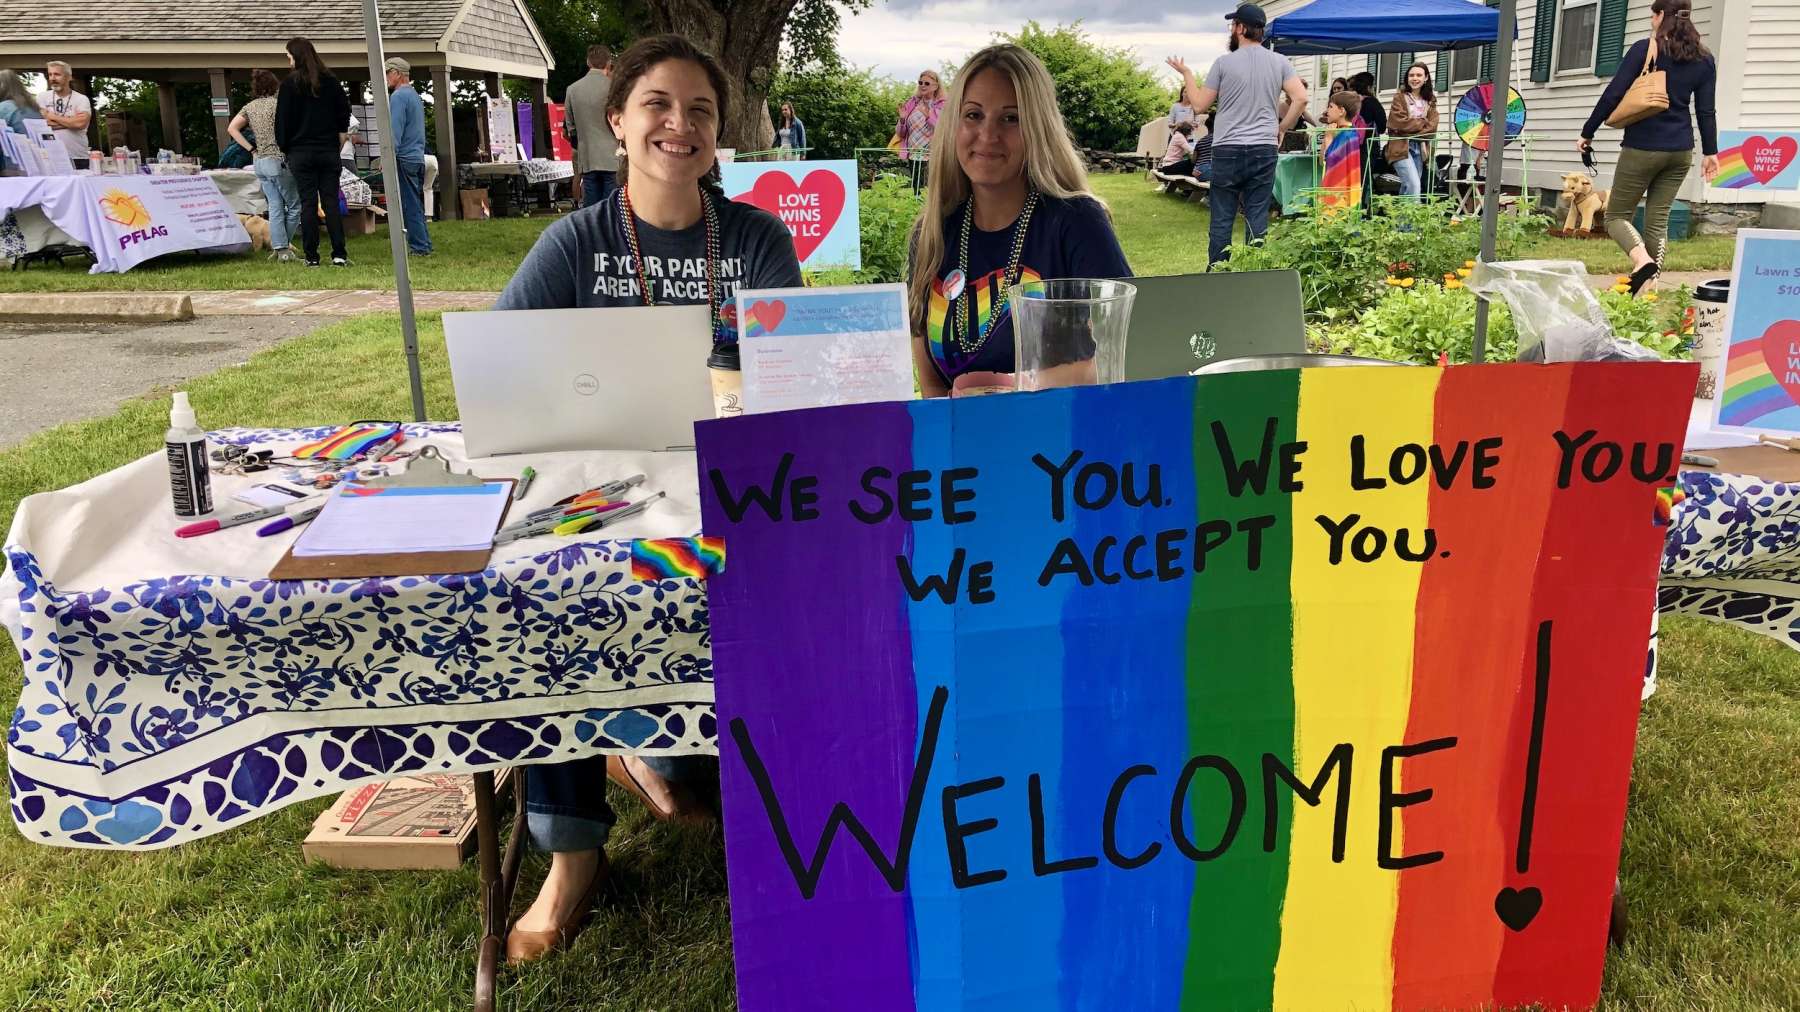 Little Compton holds first official Pride celebration